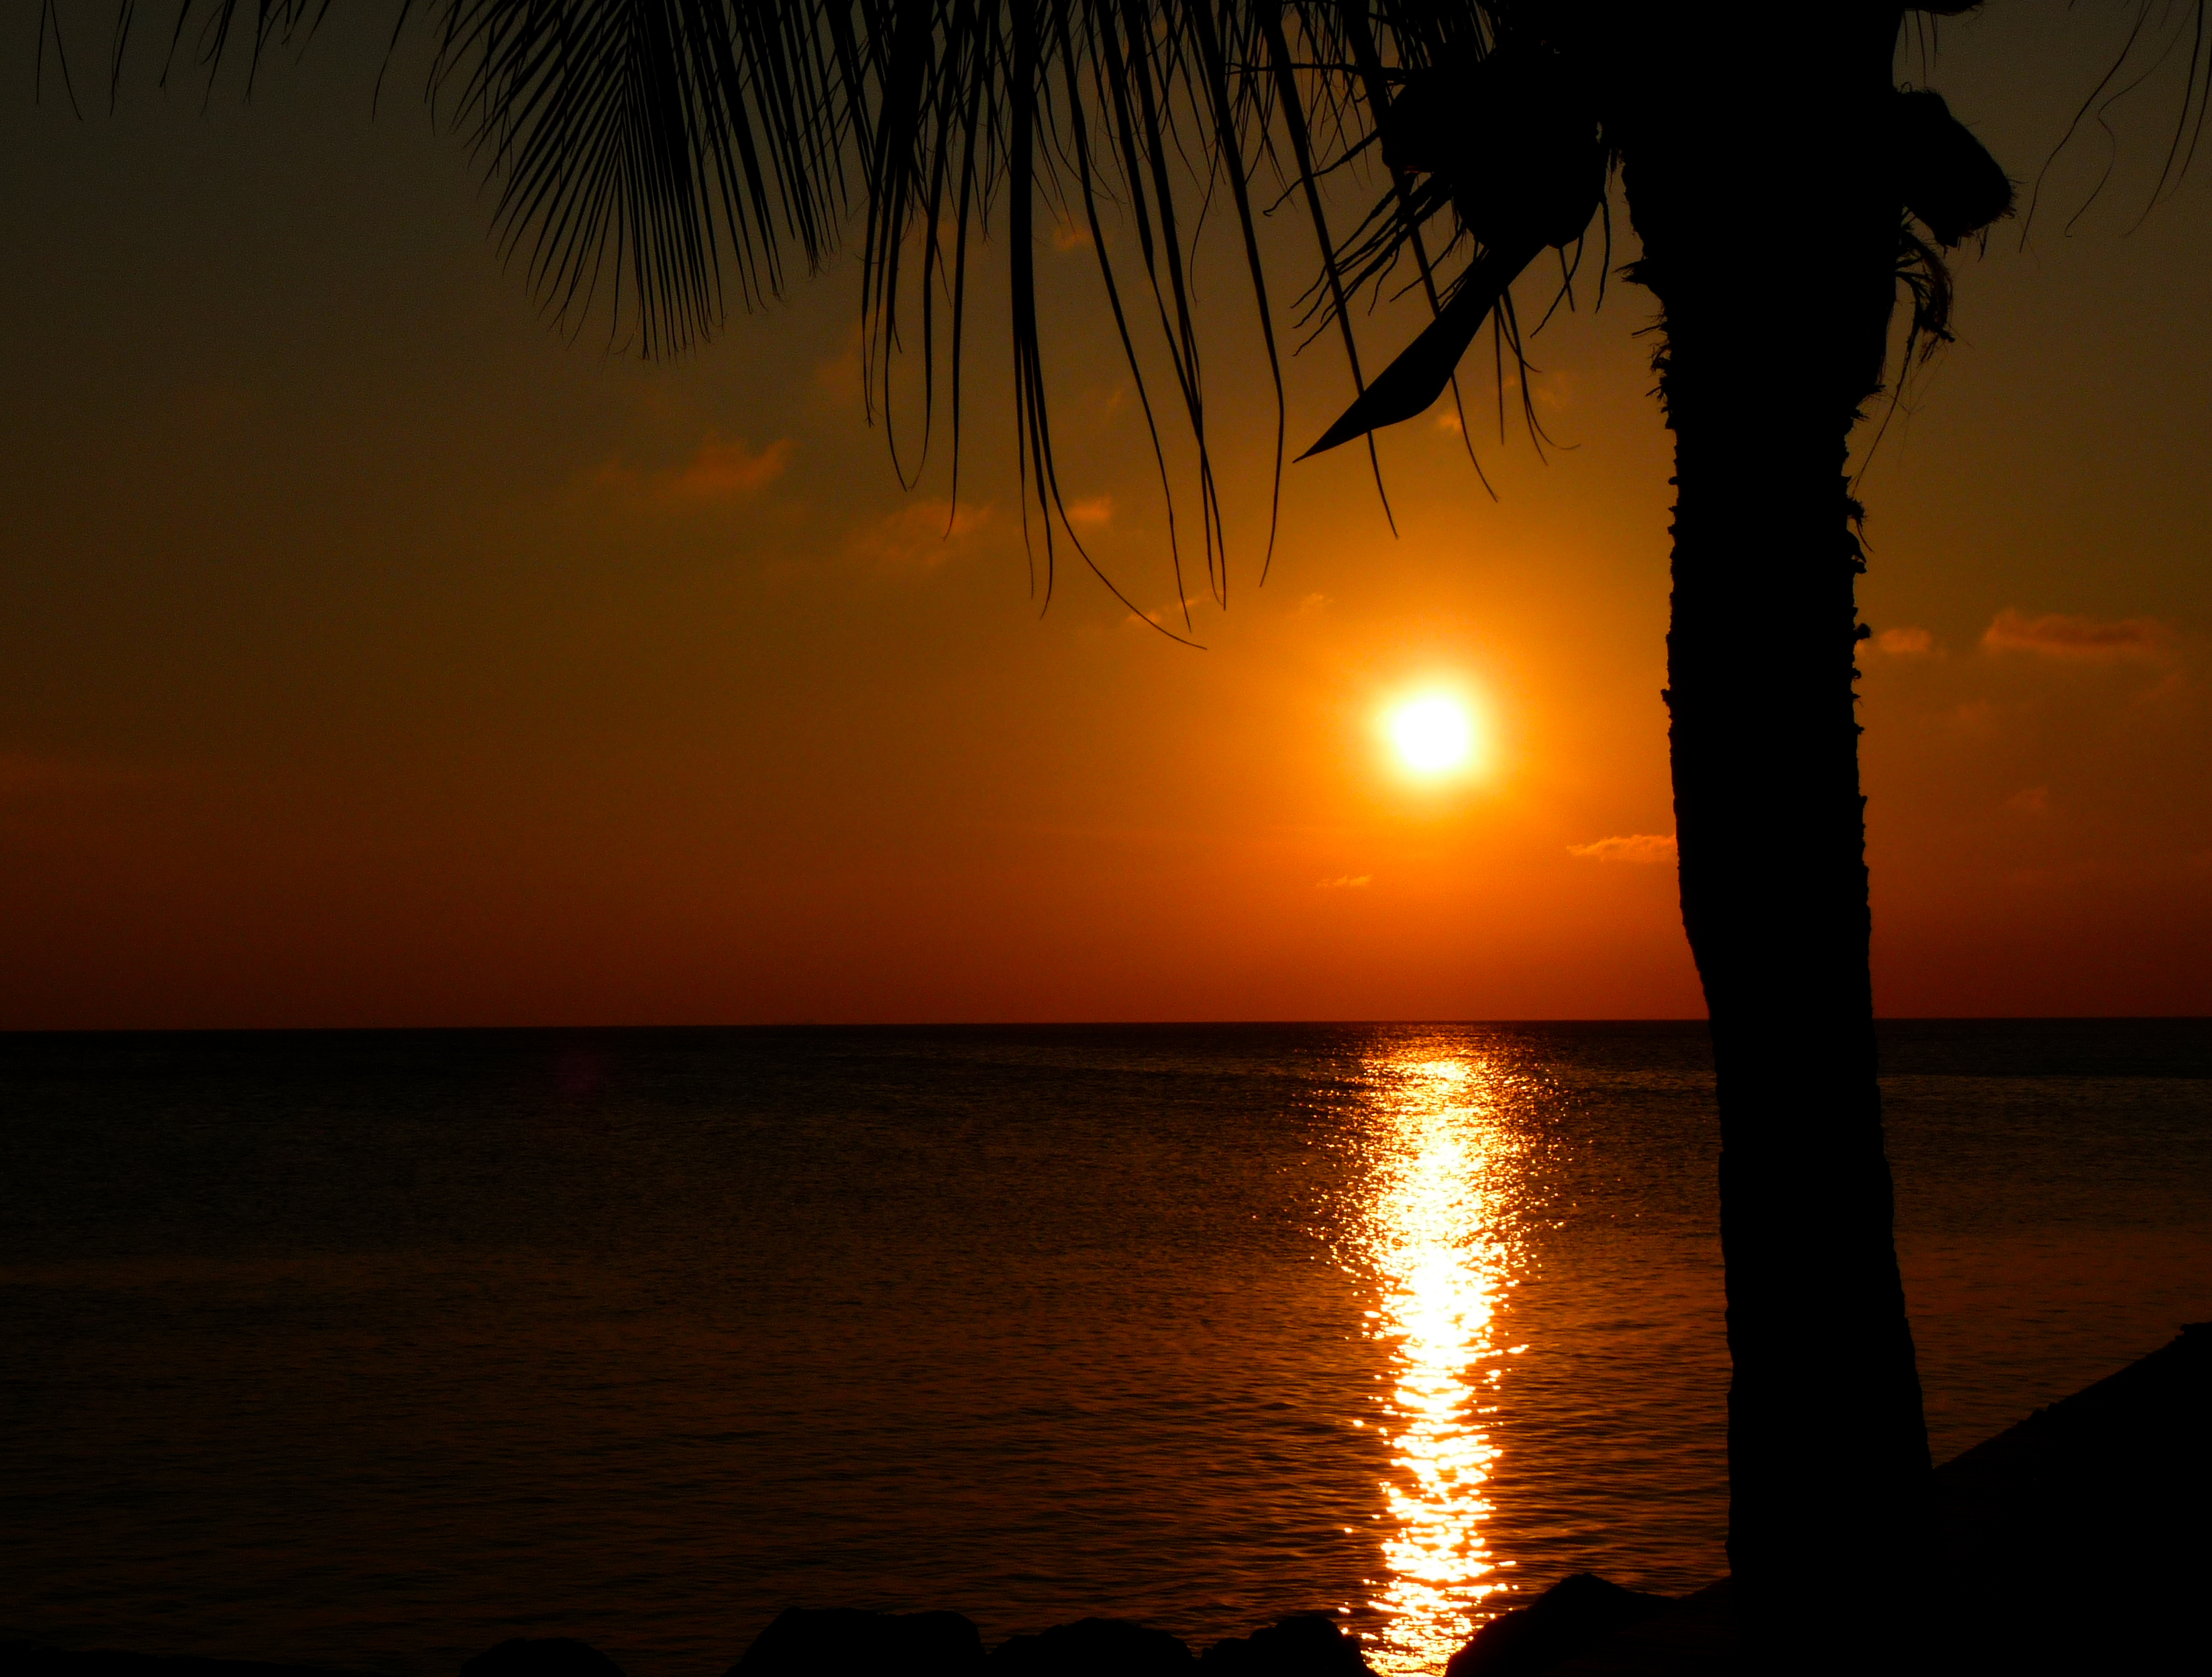 sea dawn sunset holiday - We Buy Apartments in Grand Prairie Texas - OUR MAIN FOCUS RIGHT NOW IS 4 to 30 UNIT BUILDINGS!